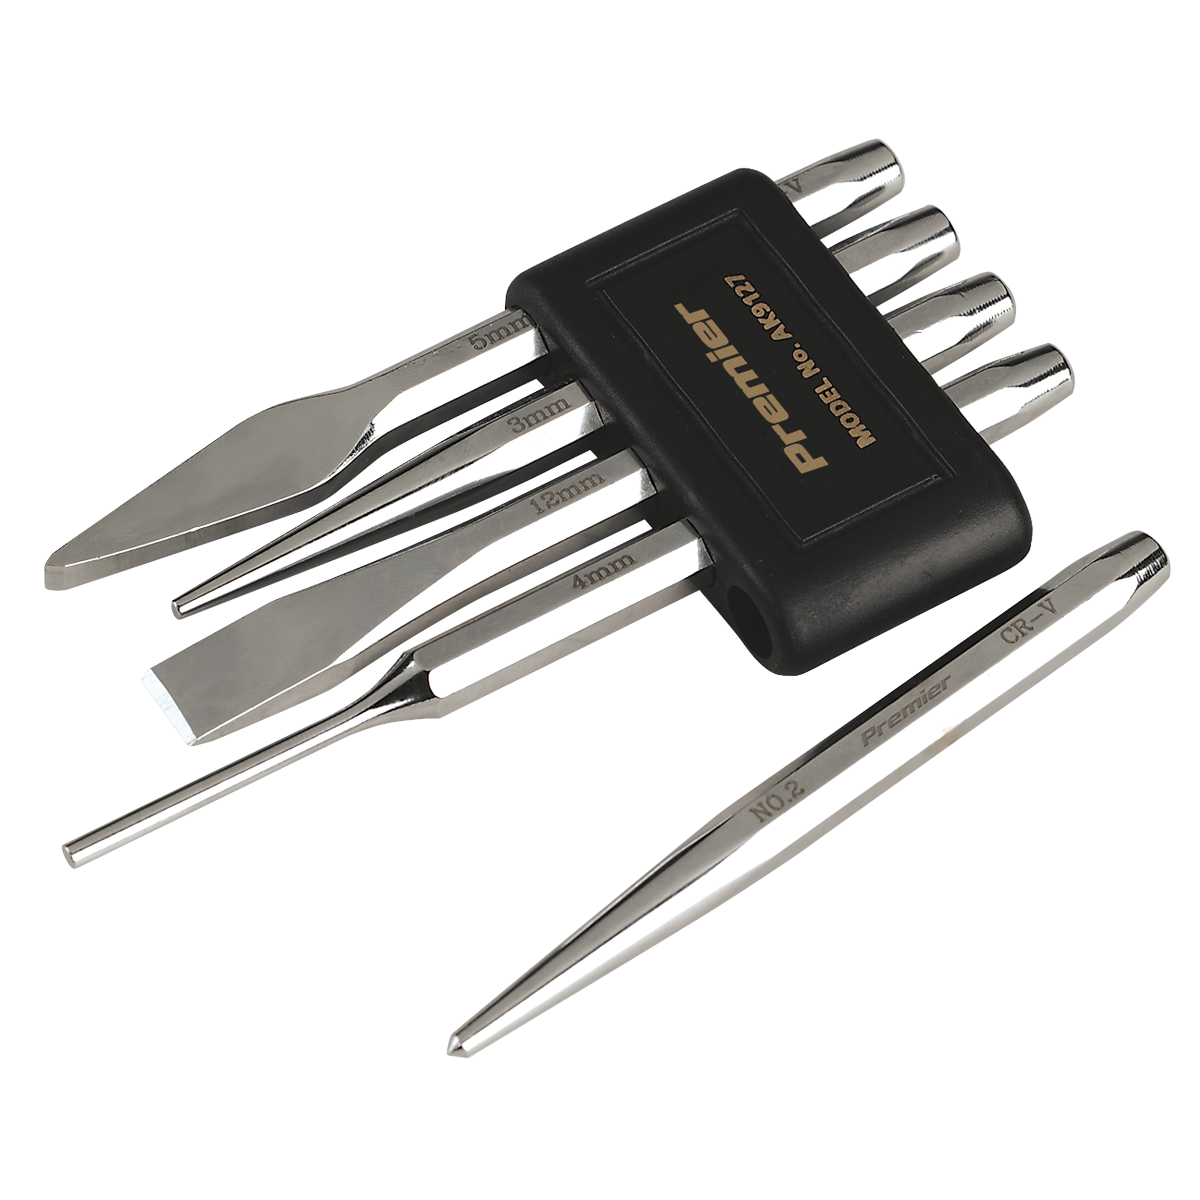 Sealey AK9127 5 Piece Punch and Chisel Set, Silver